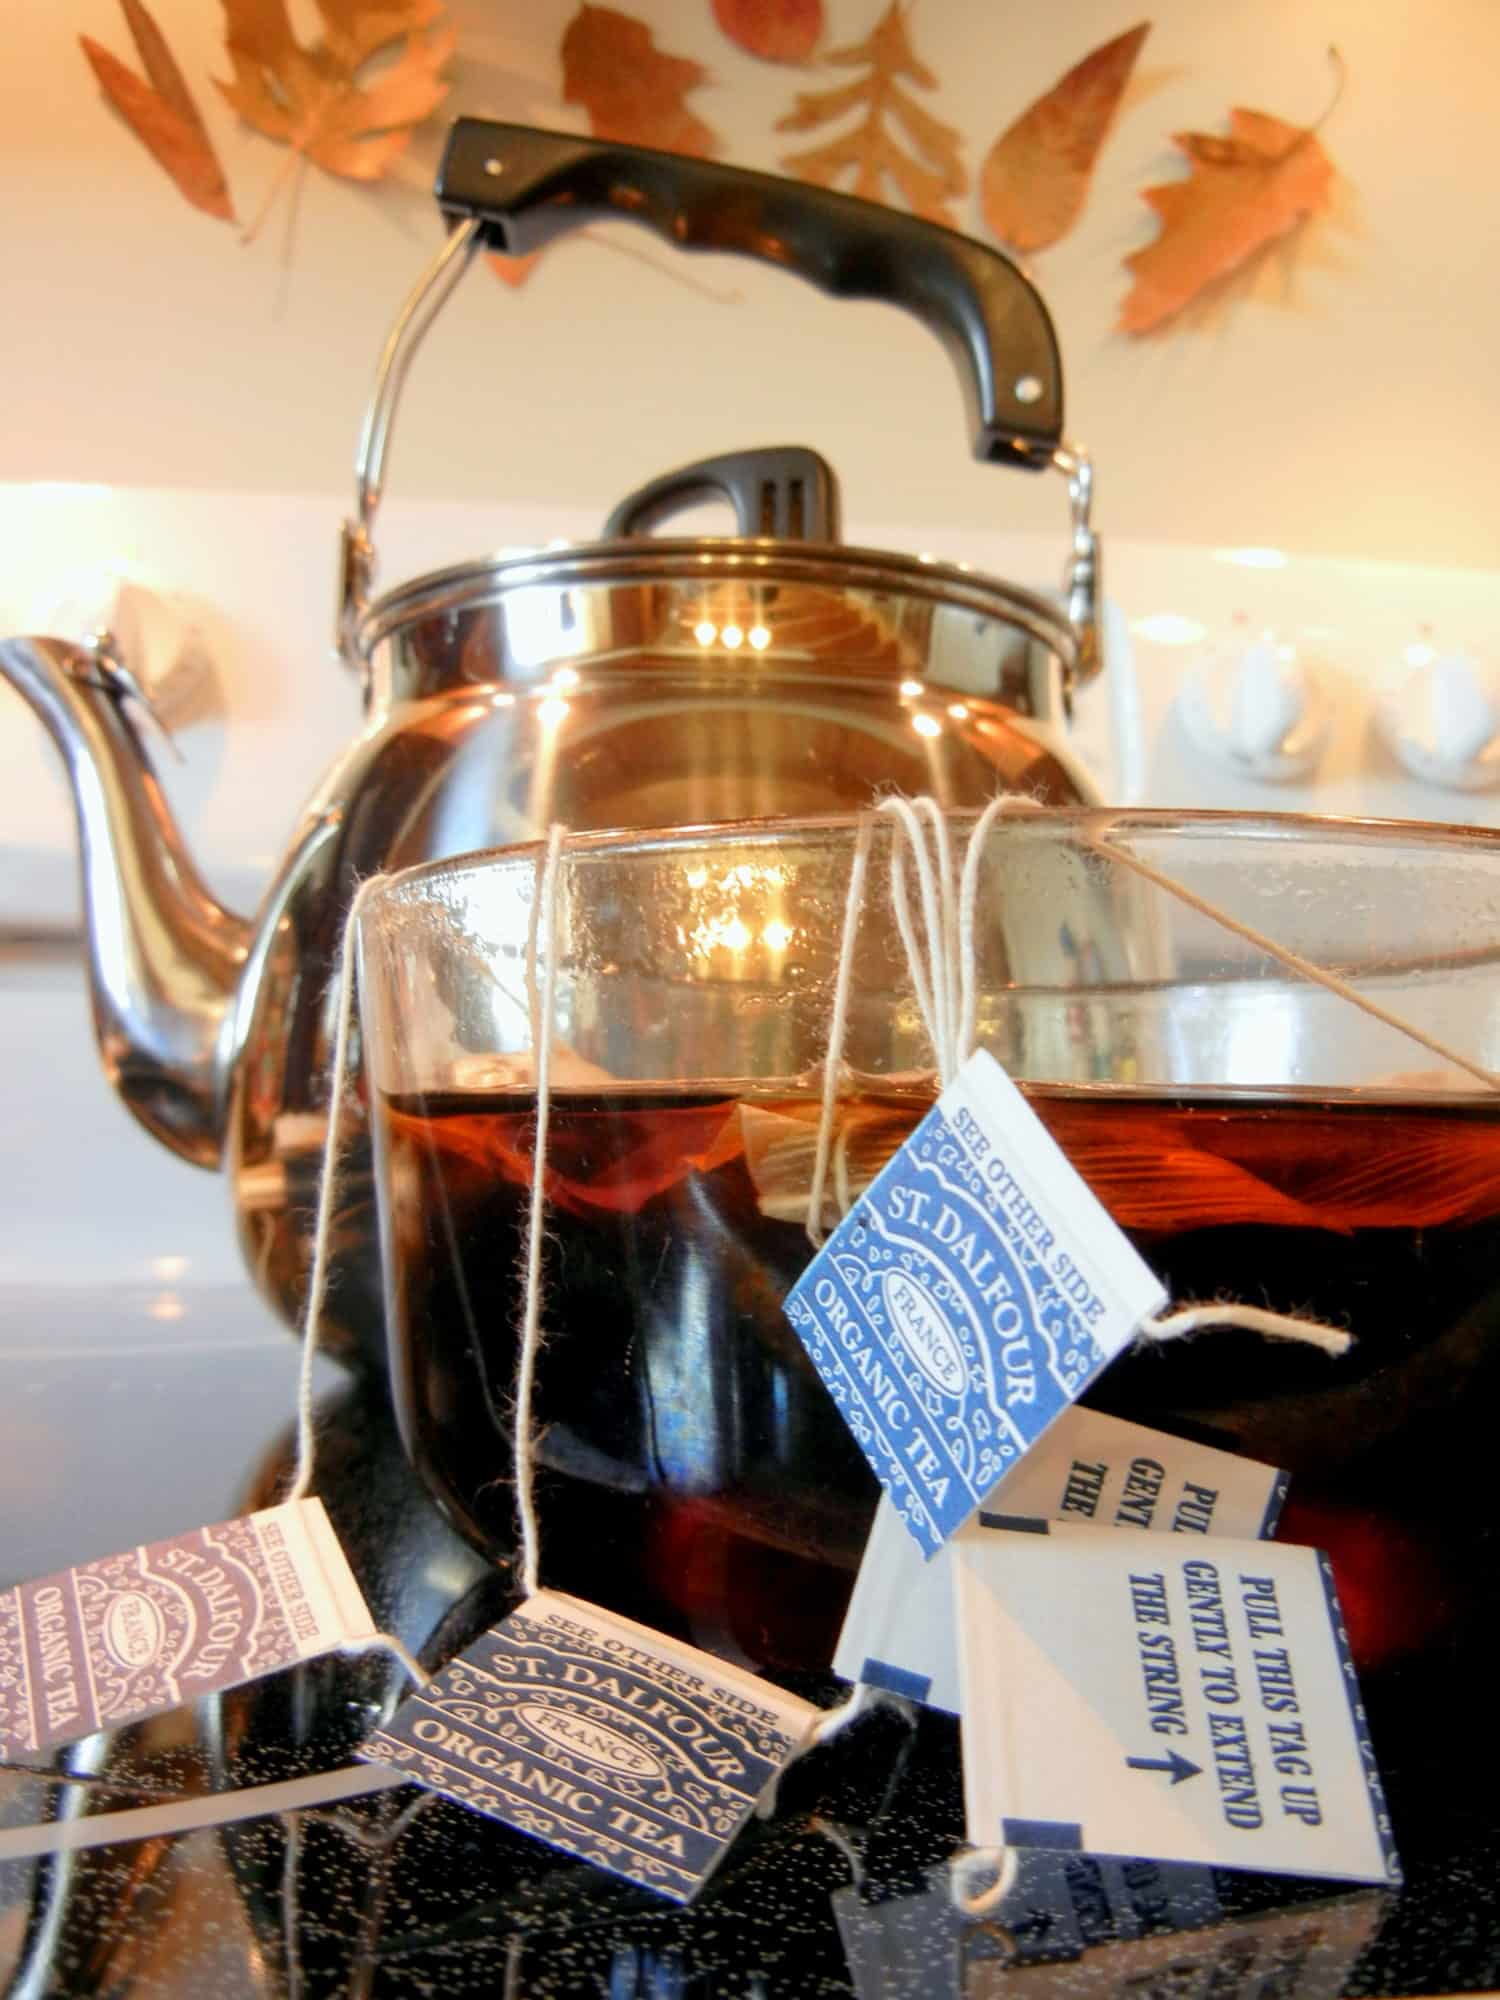 A Complete Beginner's Guide To Brewing Your Own Kombucha. steeping tea bags in boiling water